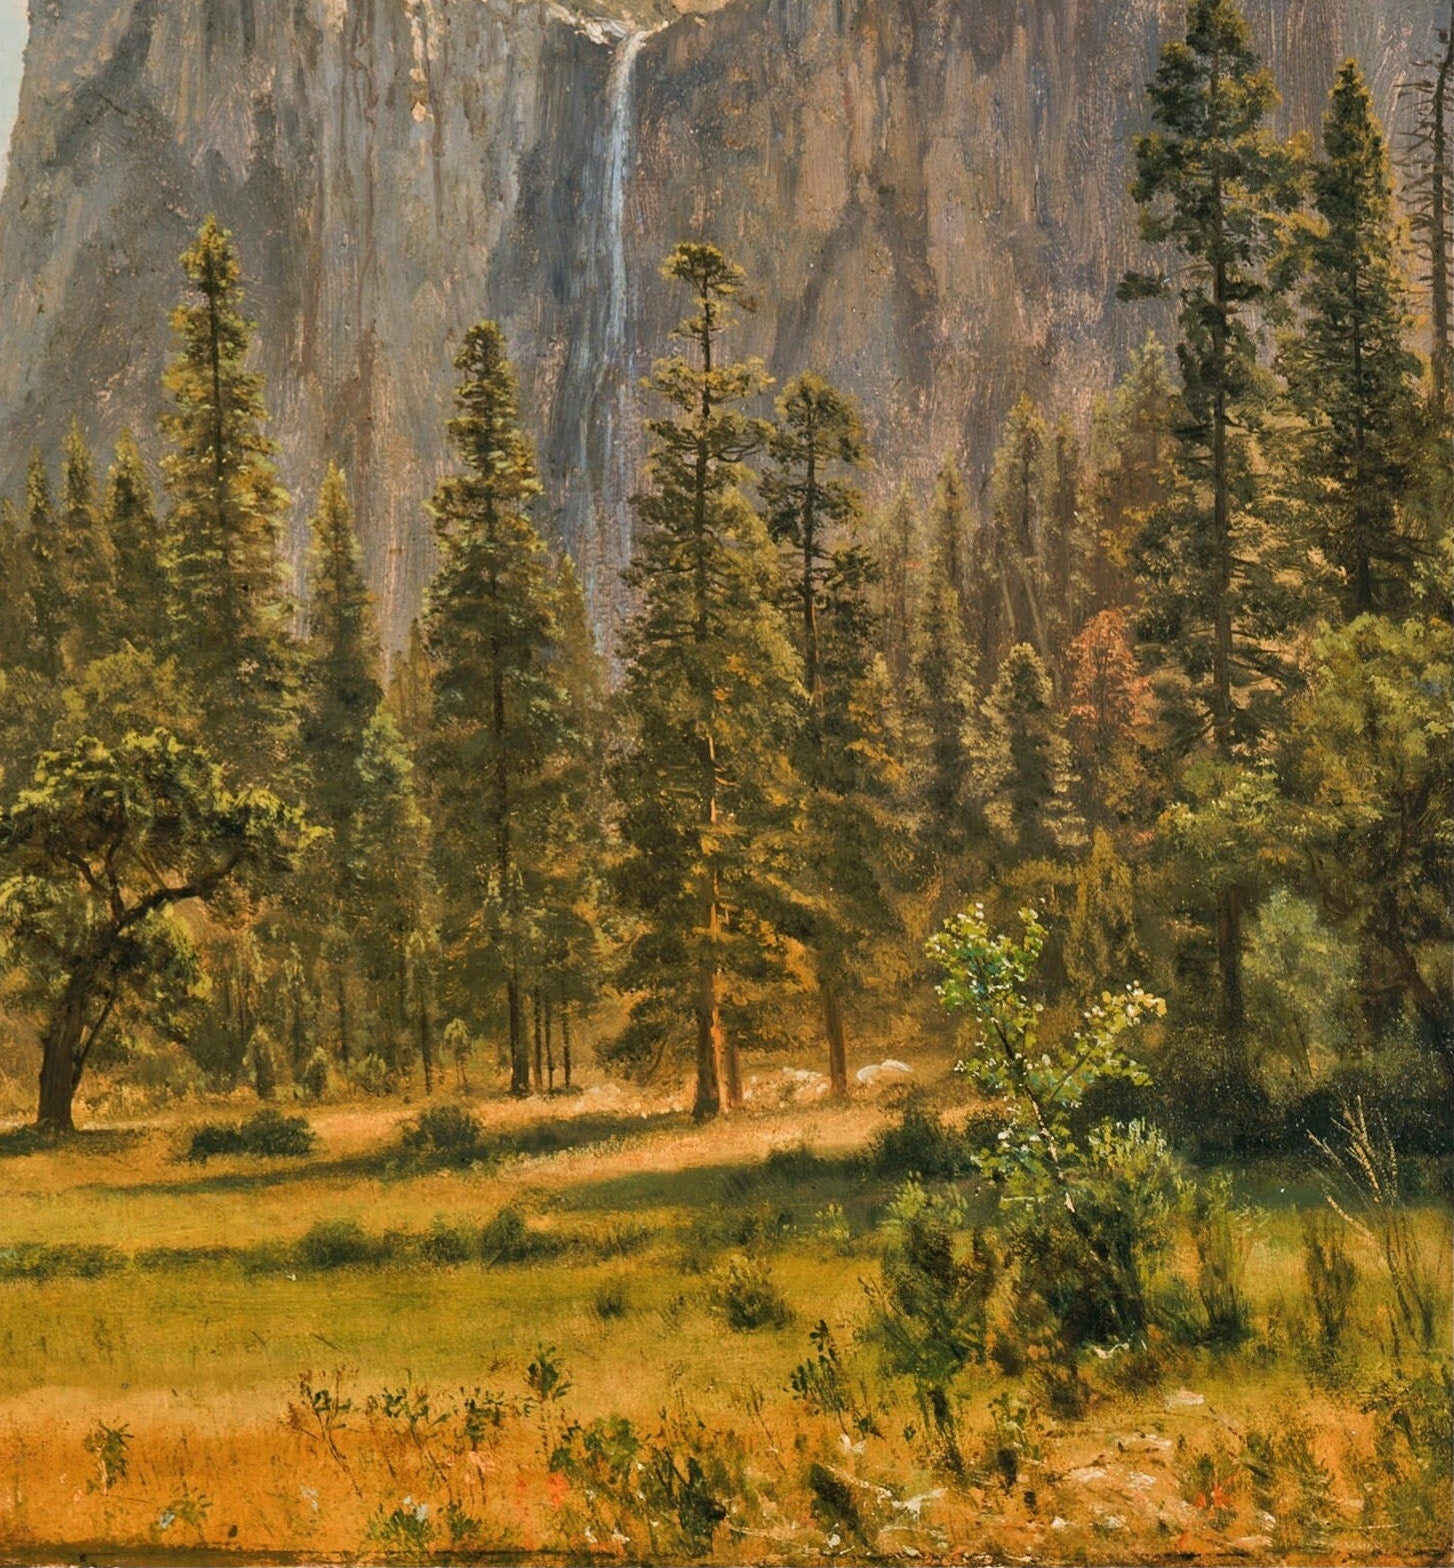 Bridal Veil Falls by Yosemite Valley, California , 3d Printed with texture and brush strokes looks like original oil-painting, code:829